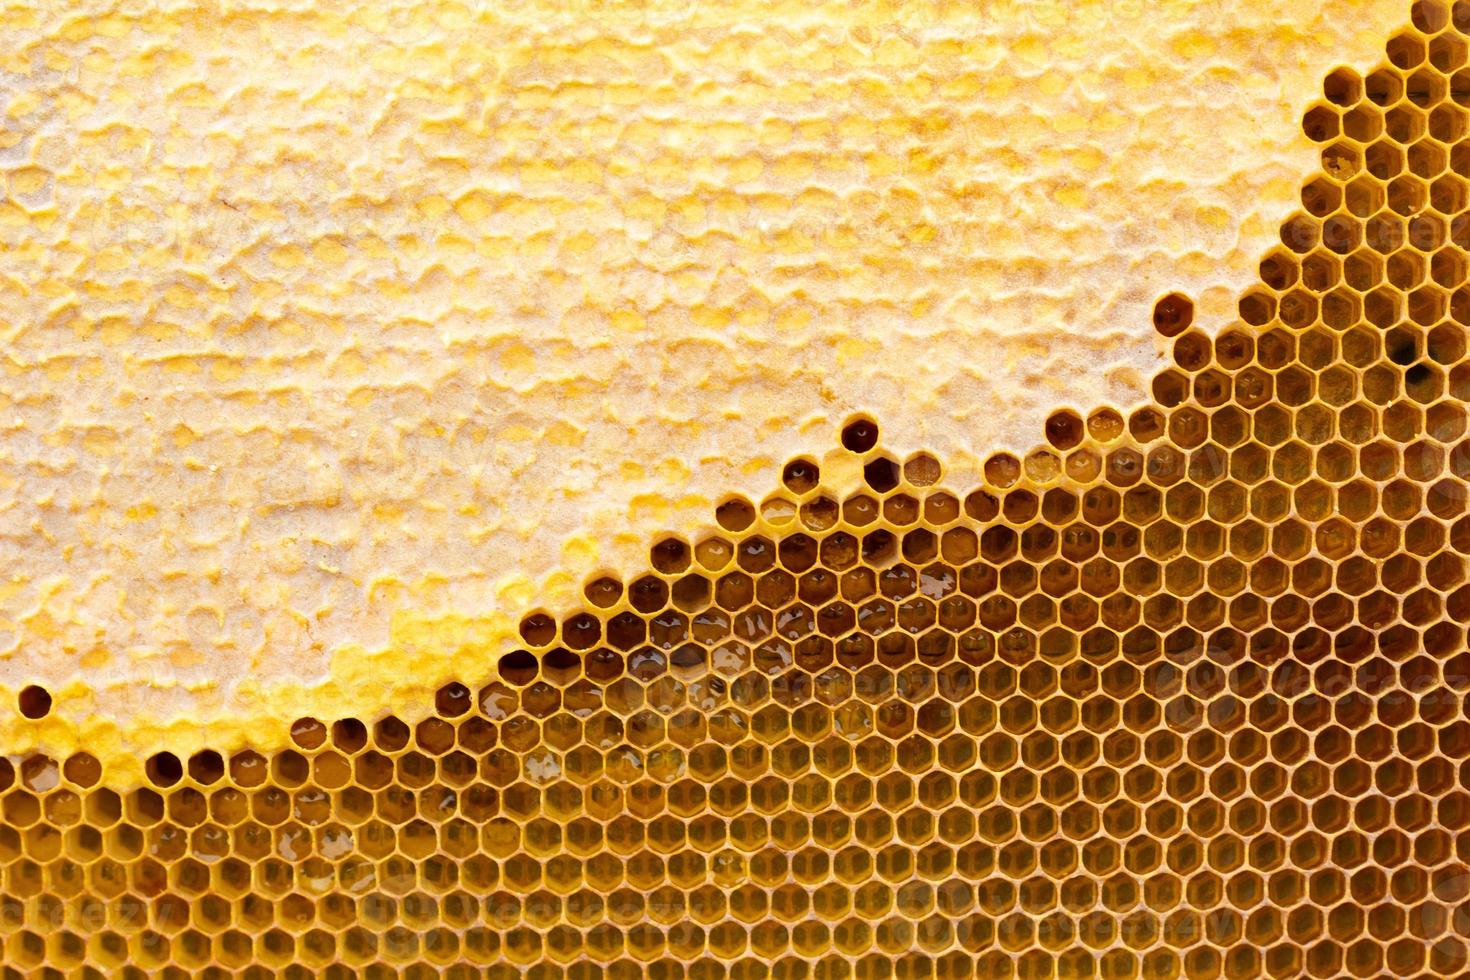 honeycomb with a honey texture. . Background texture and drawing of a section of wax honeycomb from photo